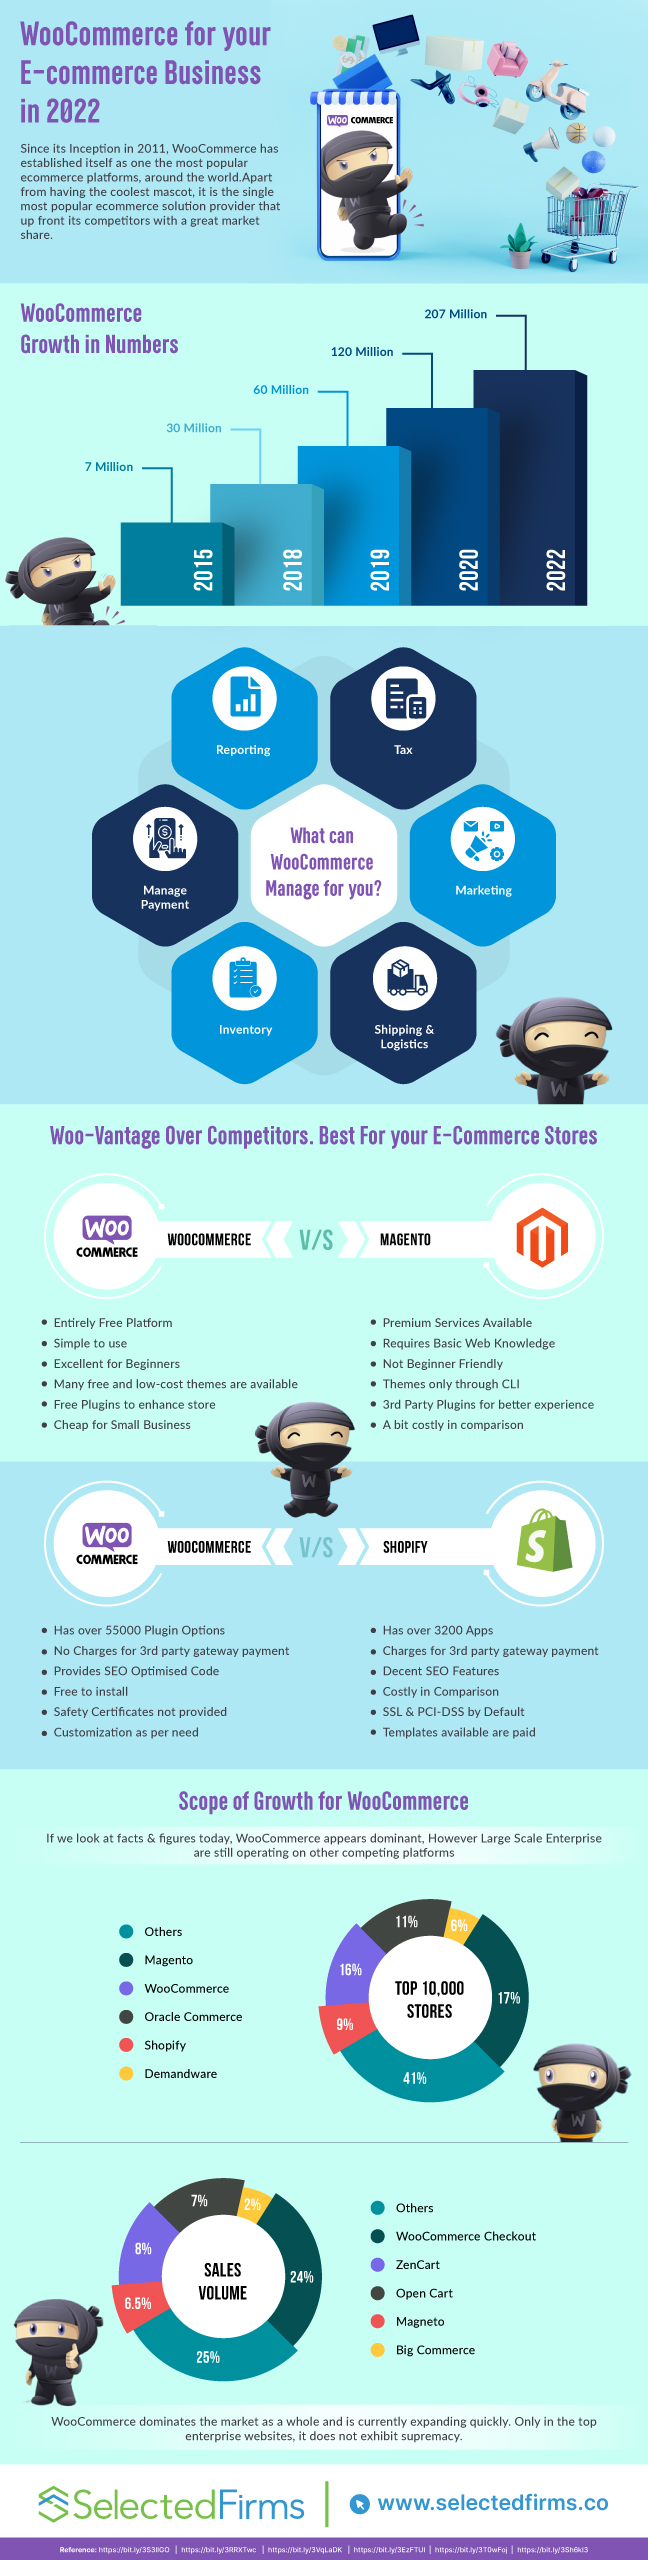 WooCommerce for your Ecommerce Business in 2022 Infographic